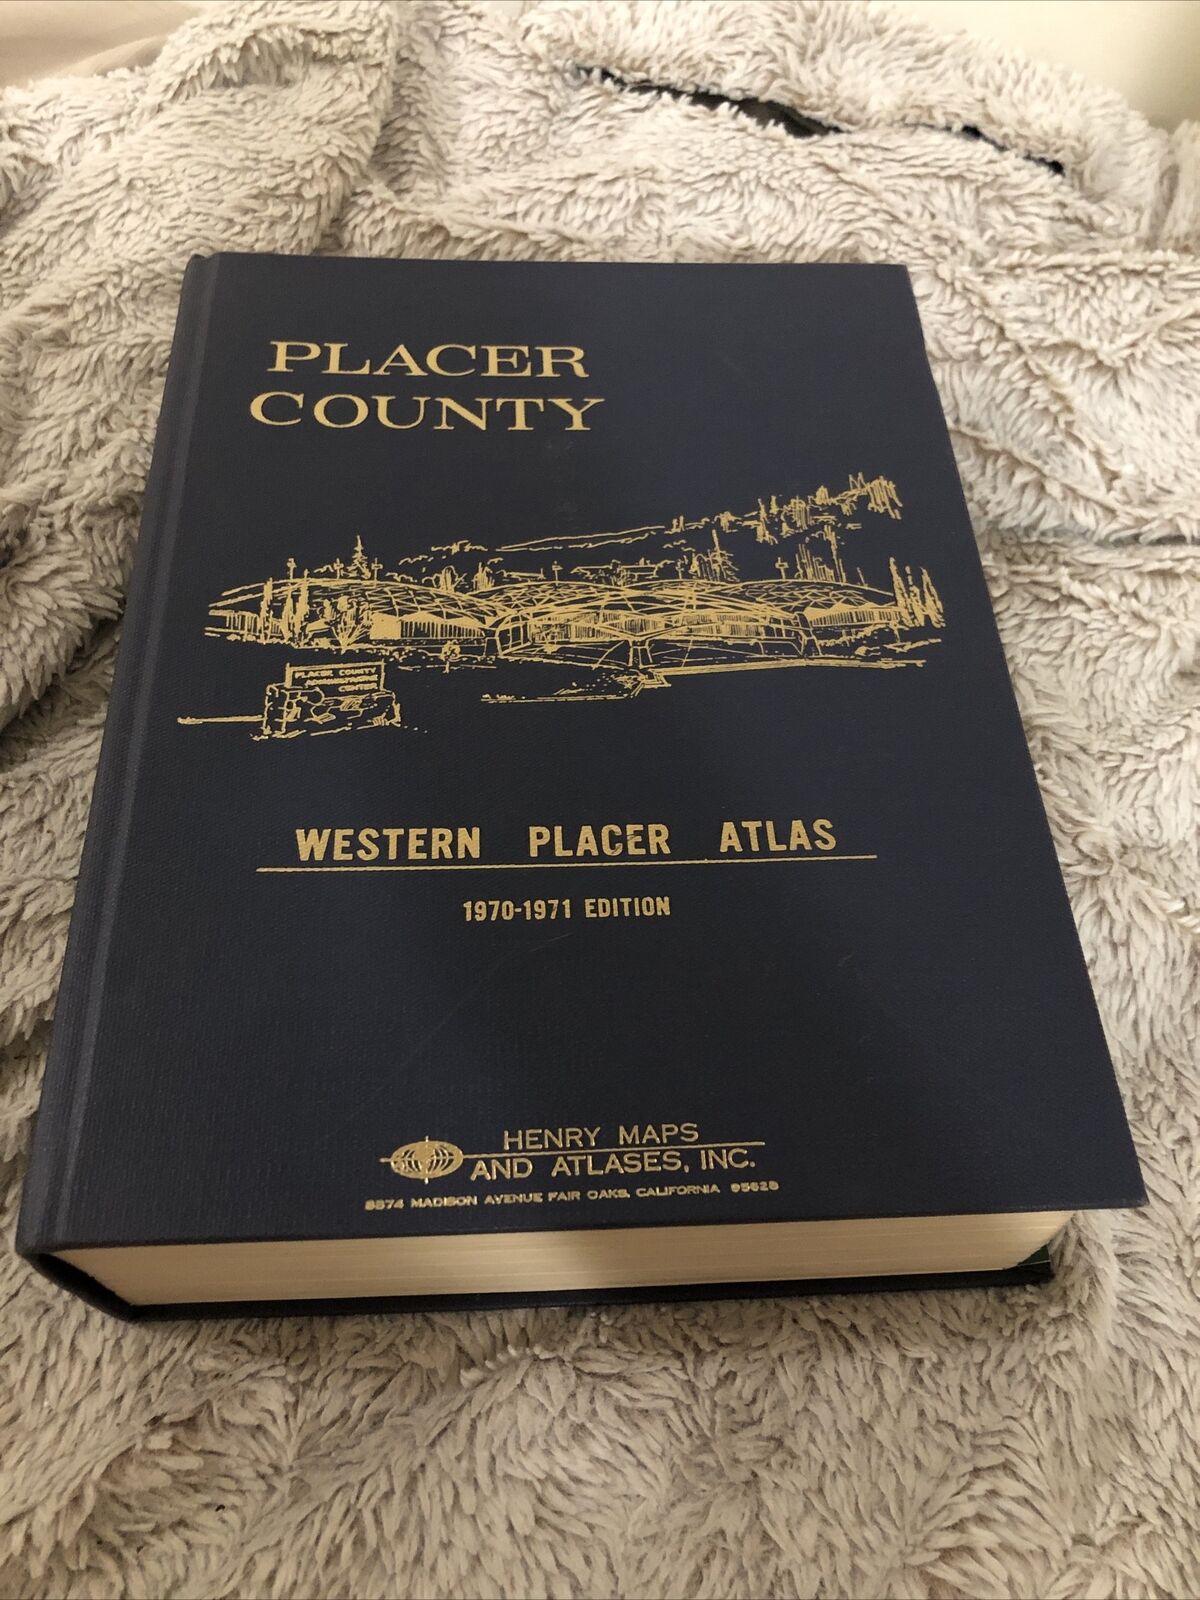 Placer County Western Placer Atlas 1970-71